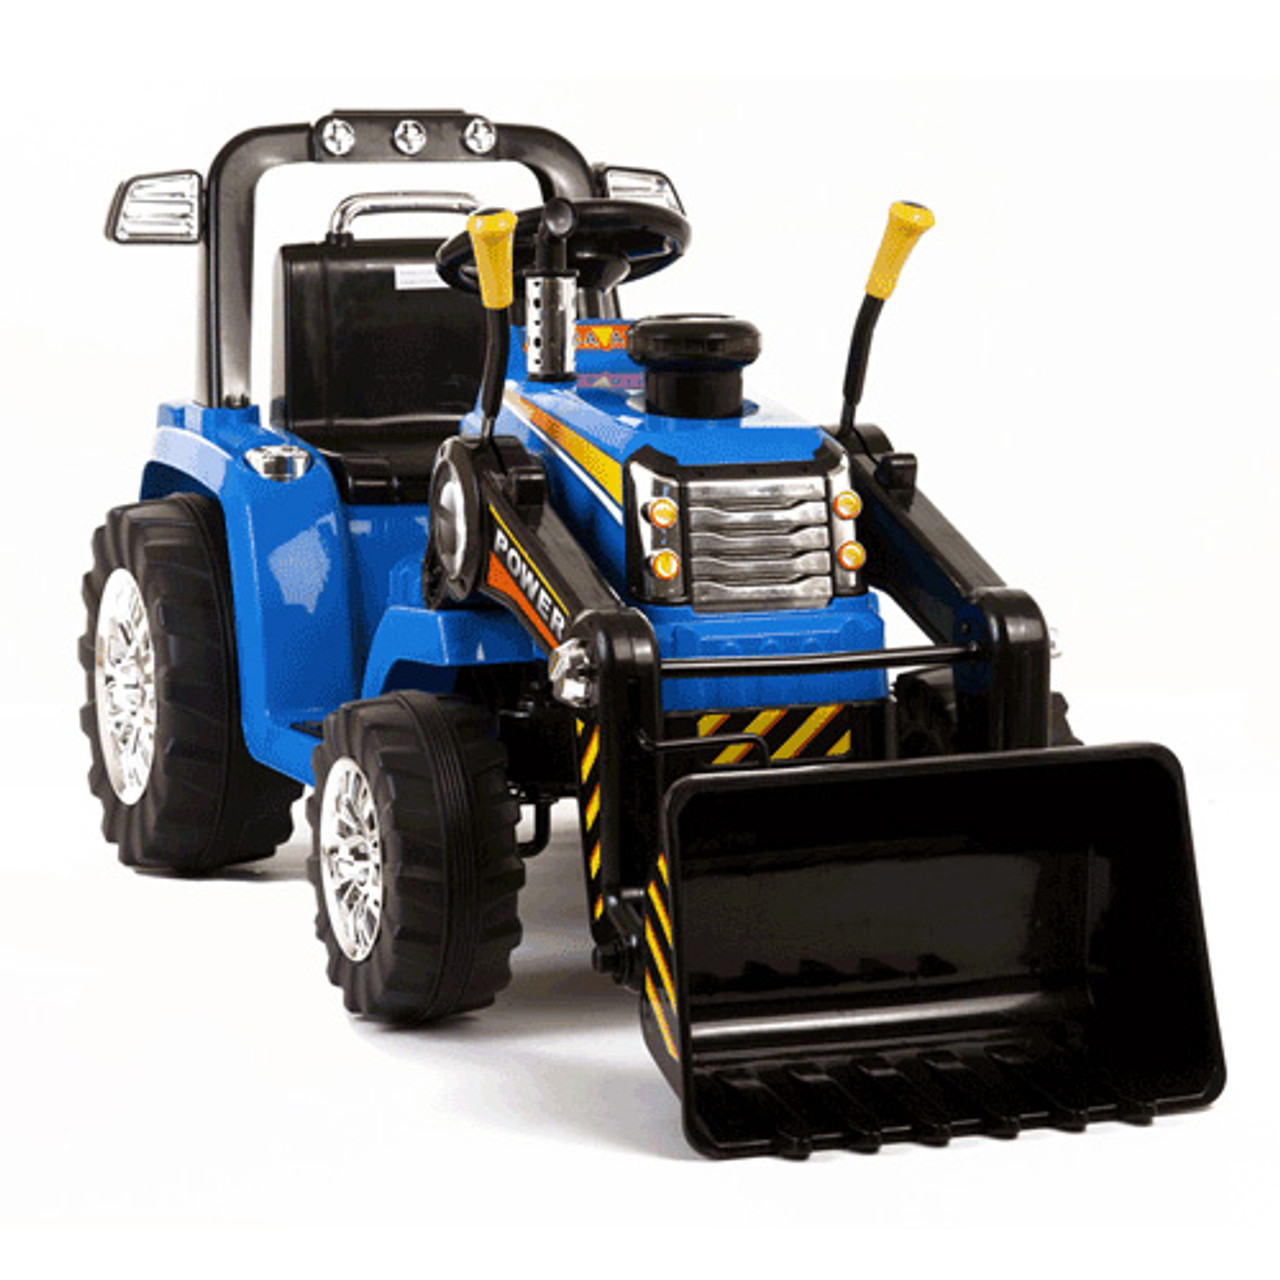 https://cdn11.bigcommerce.com/s-una3w5rq3w/images/stencil/1280x1280/products/122/435/Kids-12v-Ride-On-Micro-Tractor-Front-Bucket__65310.1637752090.jpg?c=2